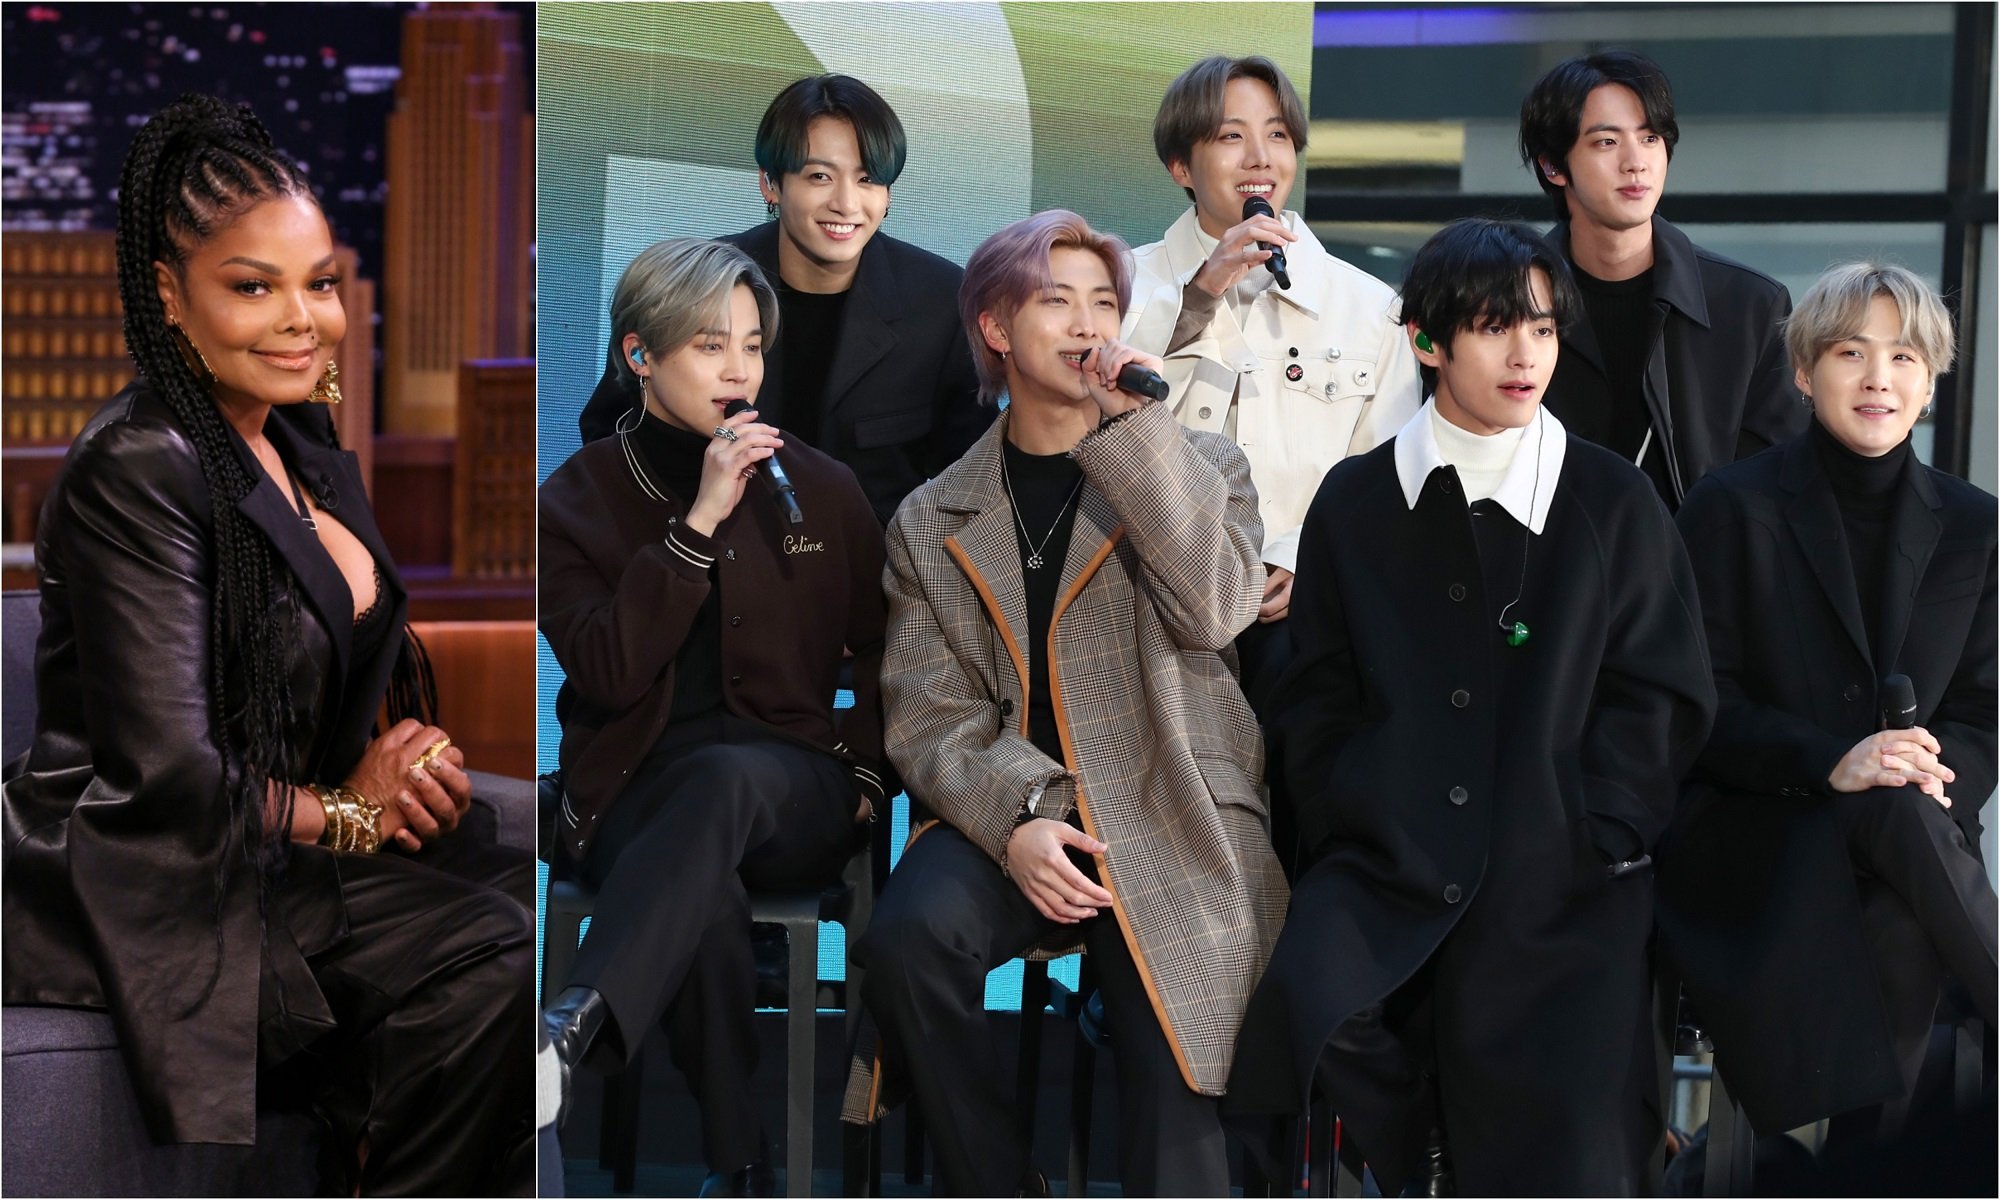 A joined photo of Janet Jackson and the members of BTS